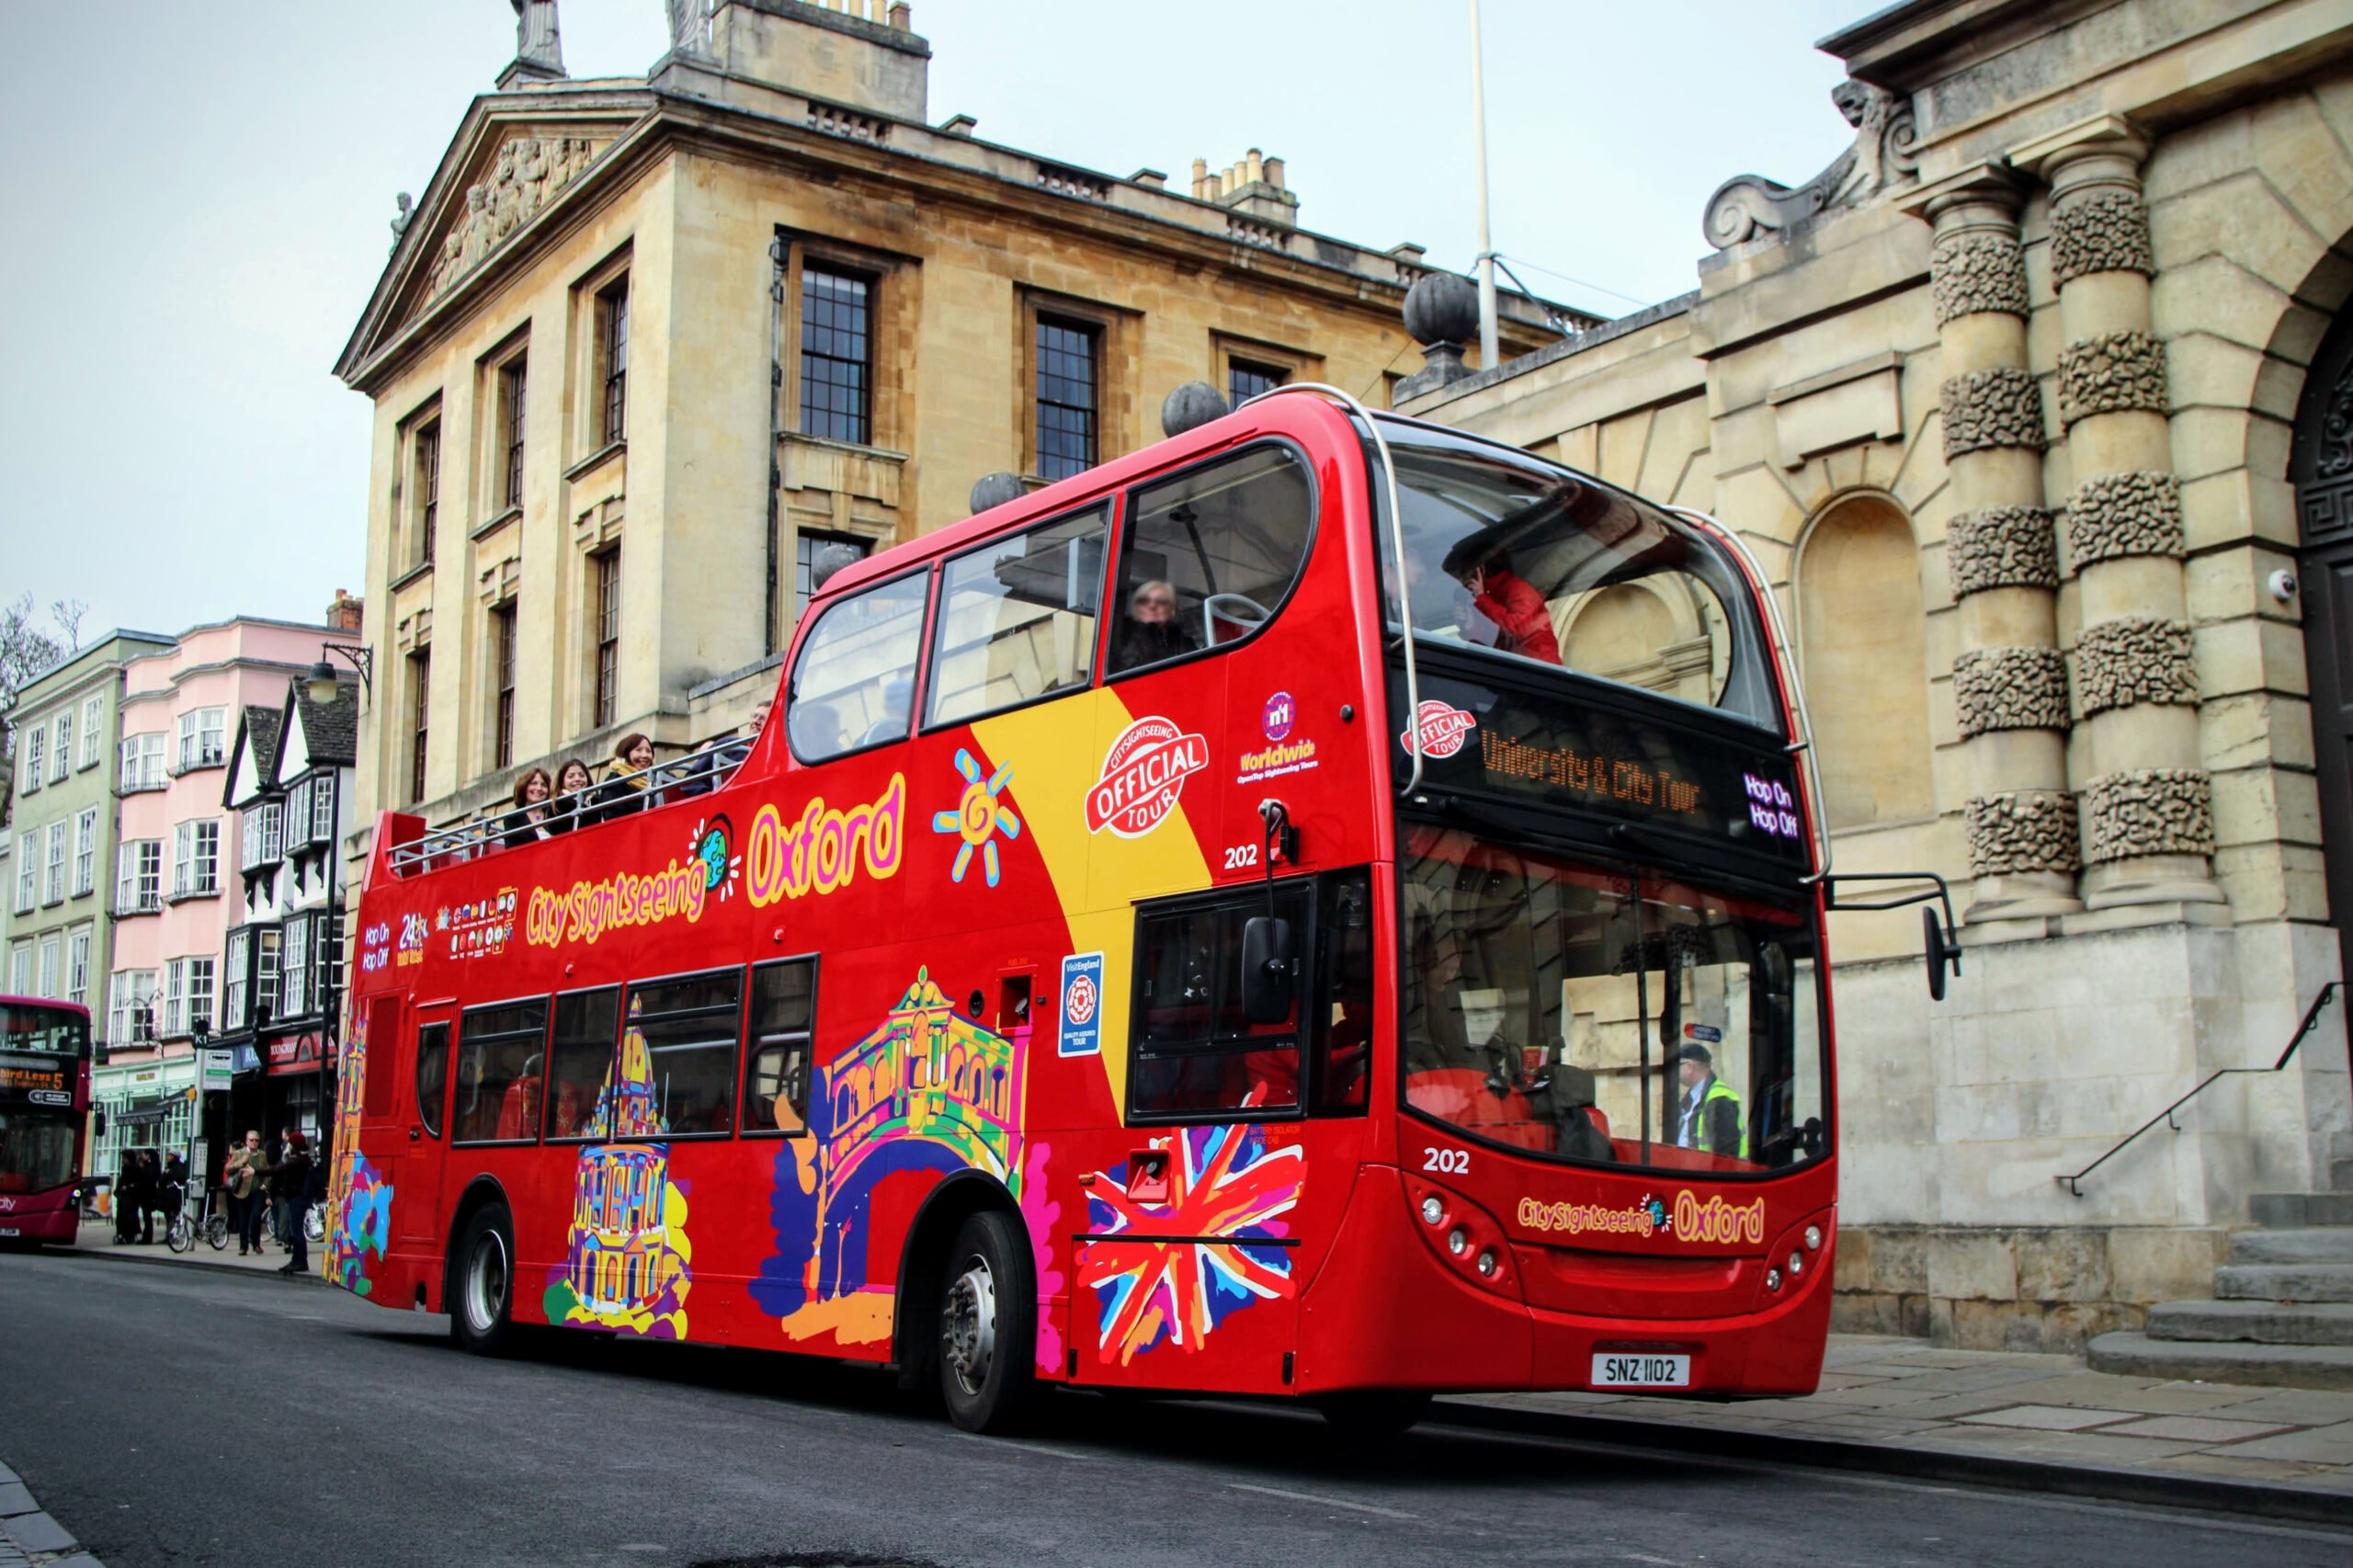 Oxford City Sightseeing Tour bus at Queens Lane in Oxford